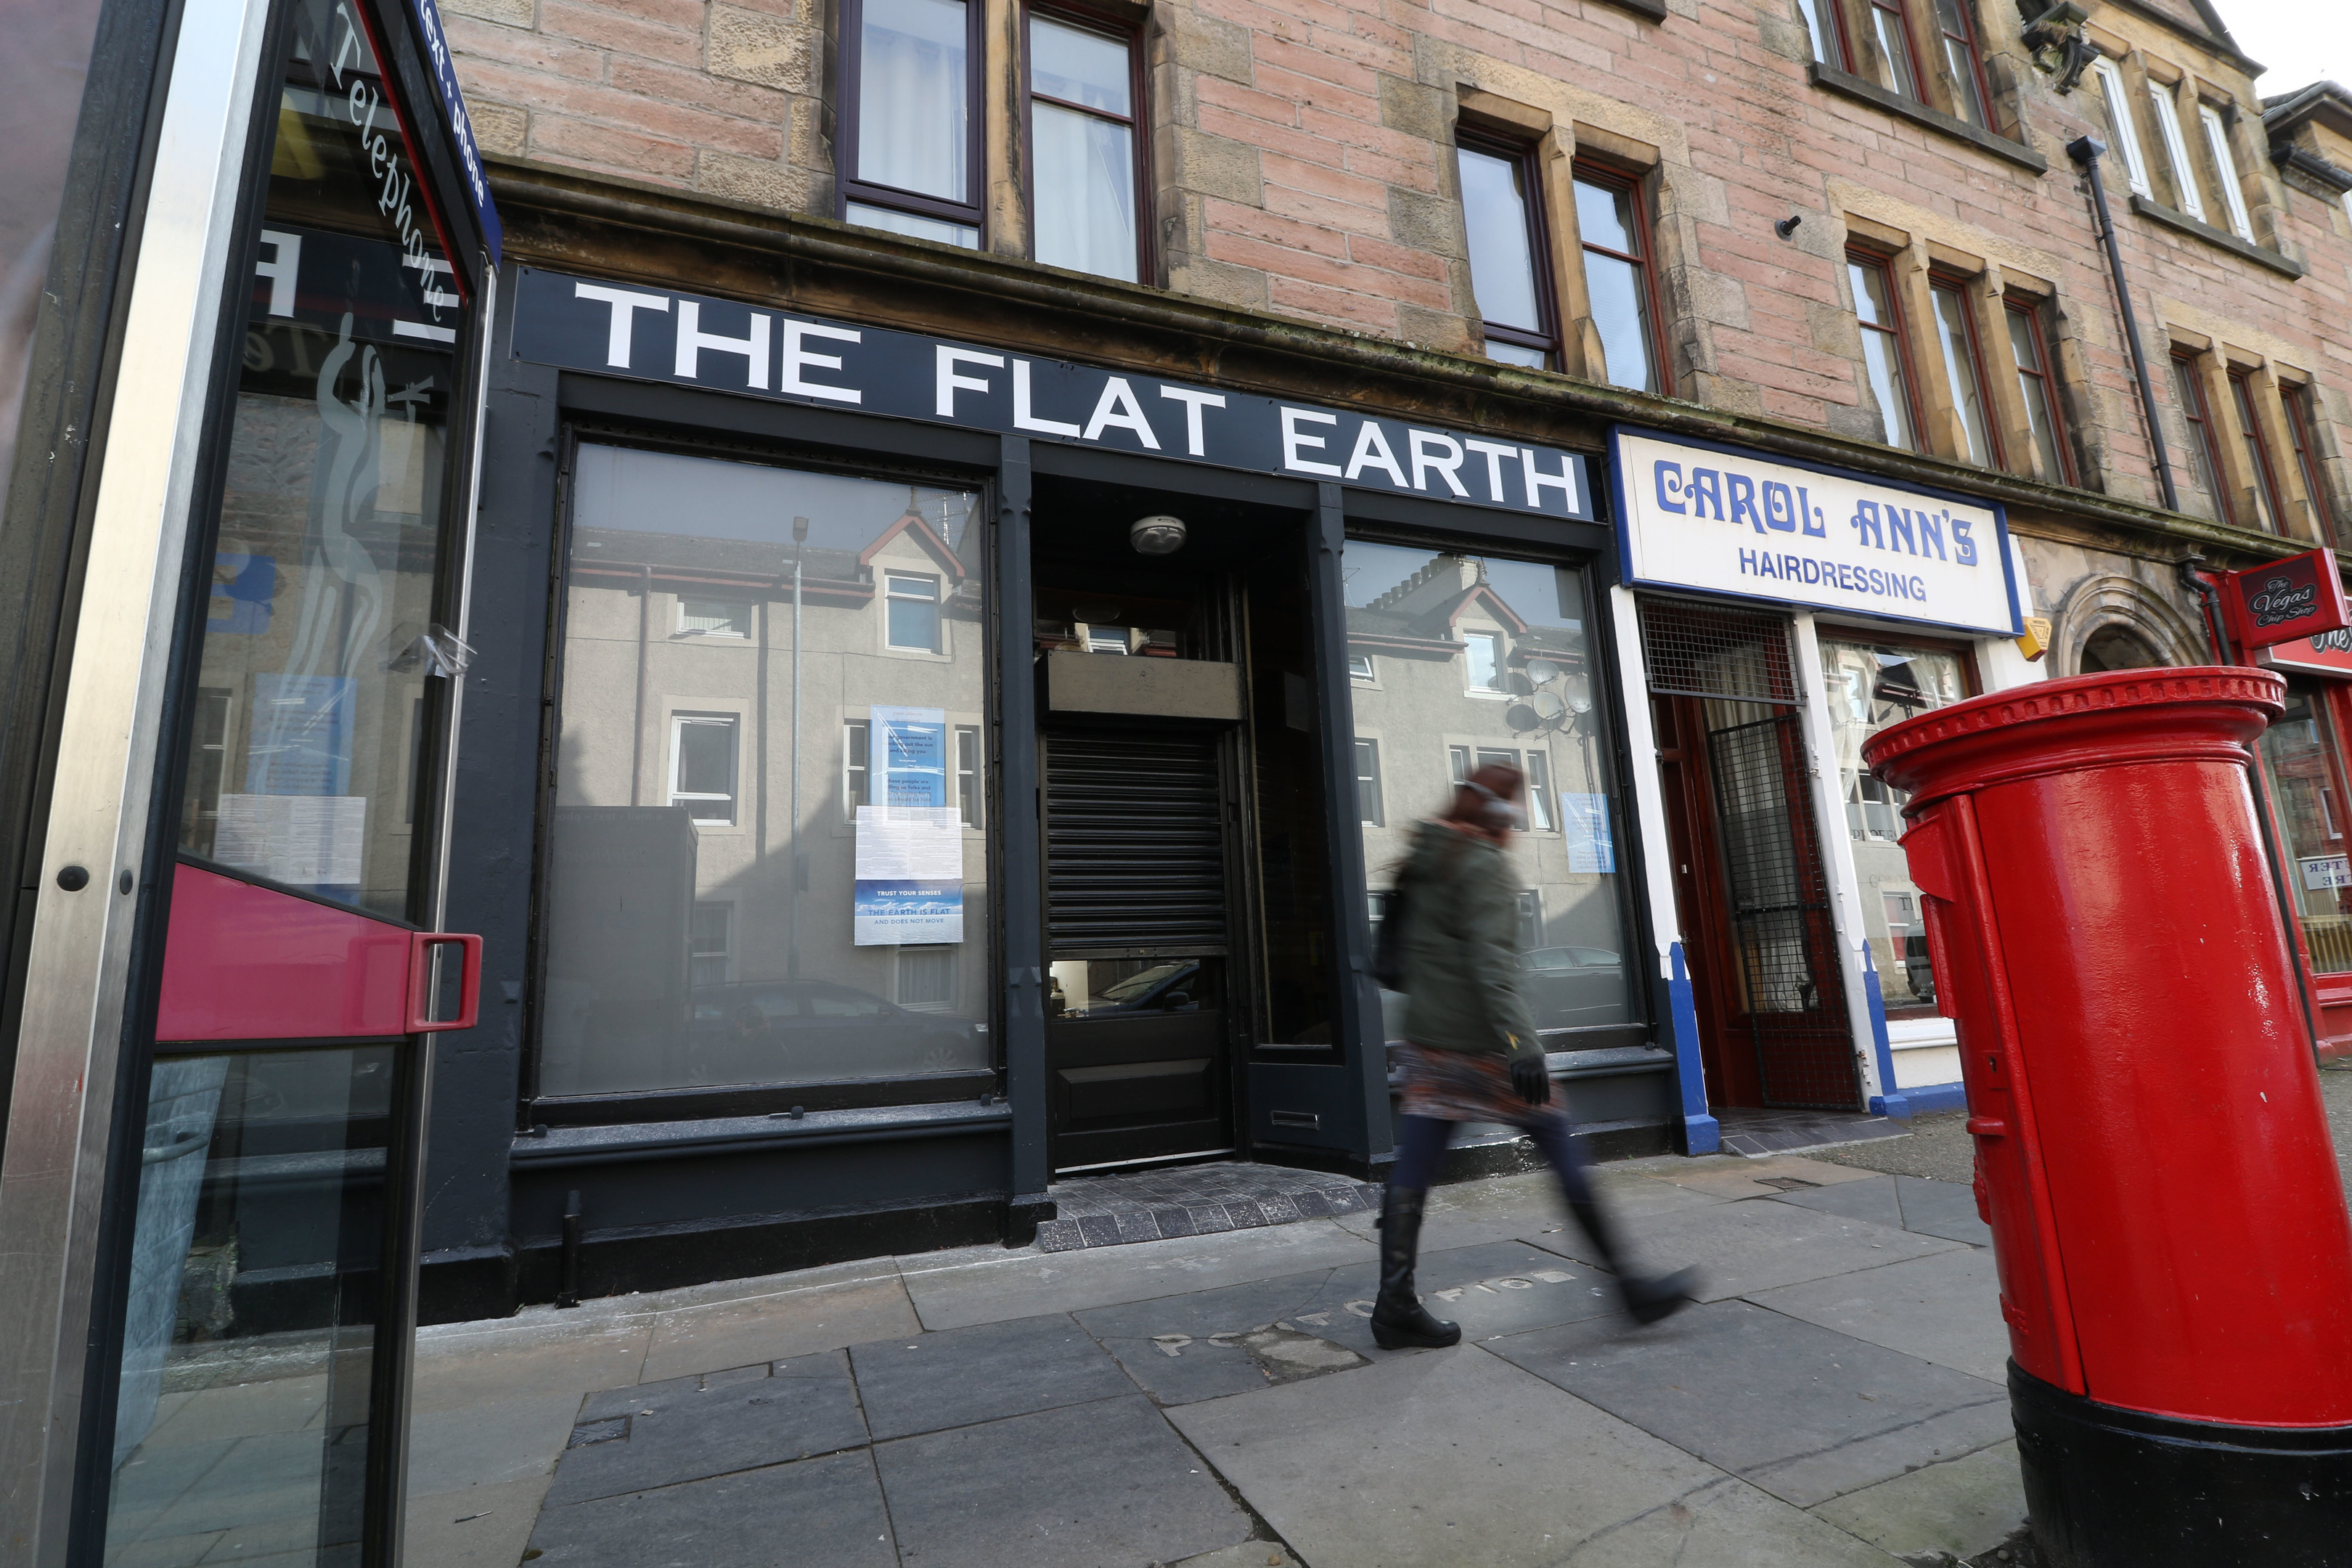 A shop called "The Flat Earth" has opened on Greig Street in Inverness, with posters in the window discussing the flat earth theory and the claimed threat from aircraft contrails.